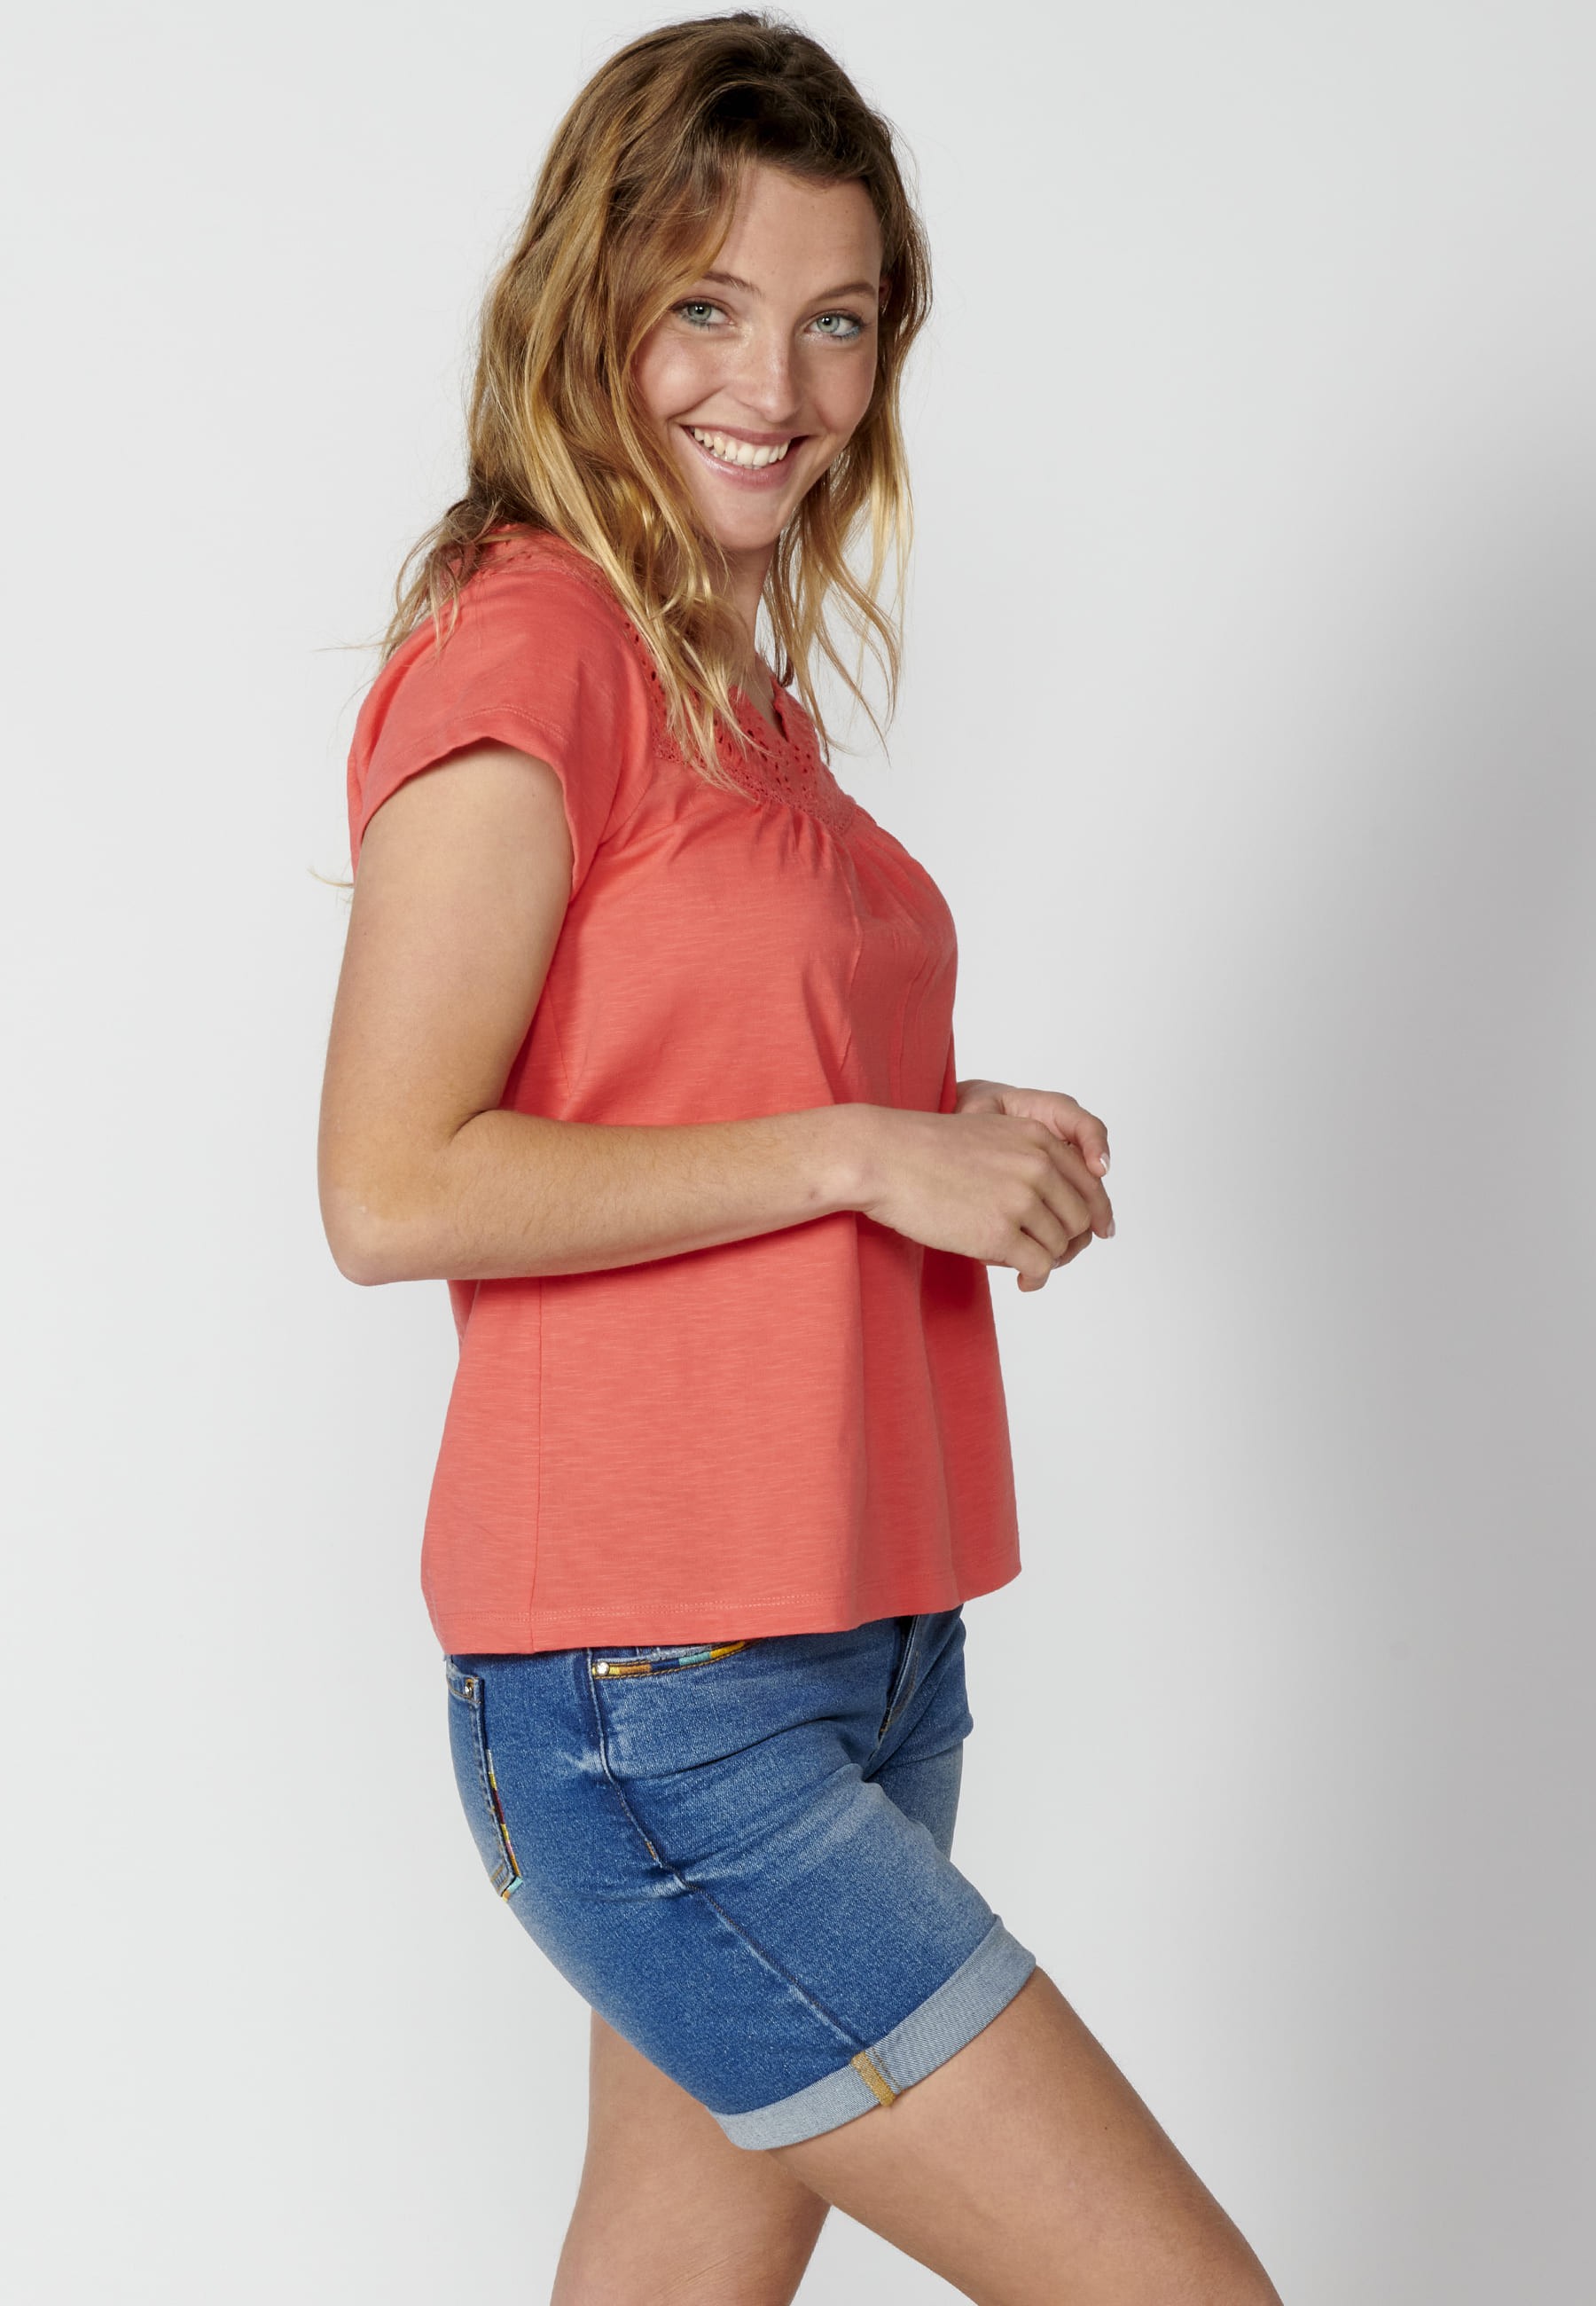 Short-sleeved Cotton T-shirt with a sweetheart neckline in Coral color for Women